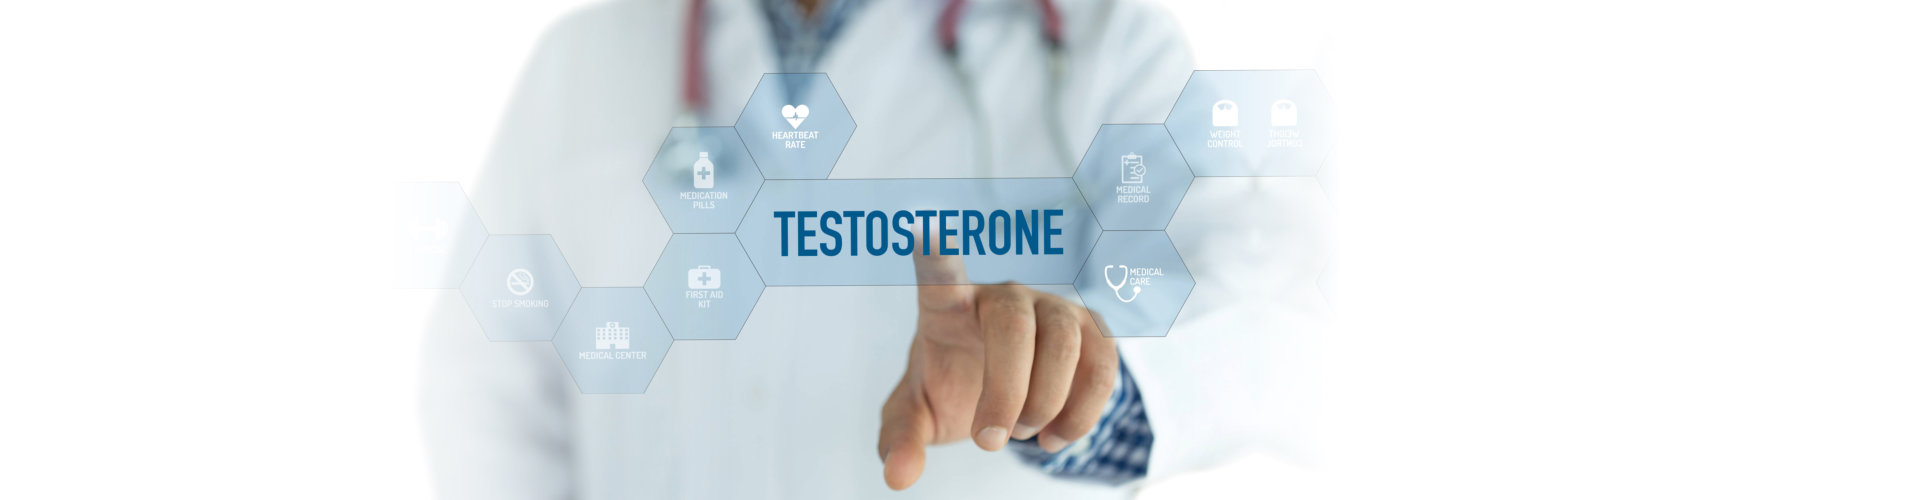 doctor touching the word testosterone